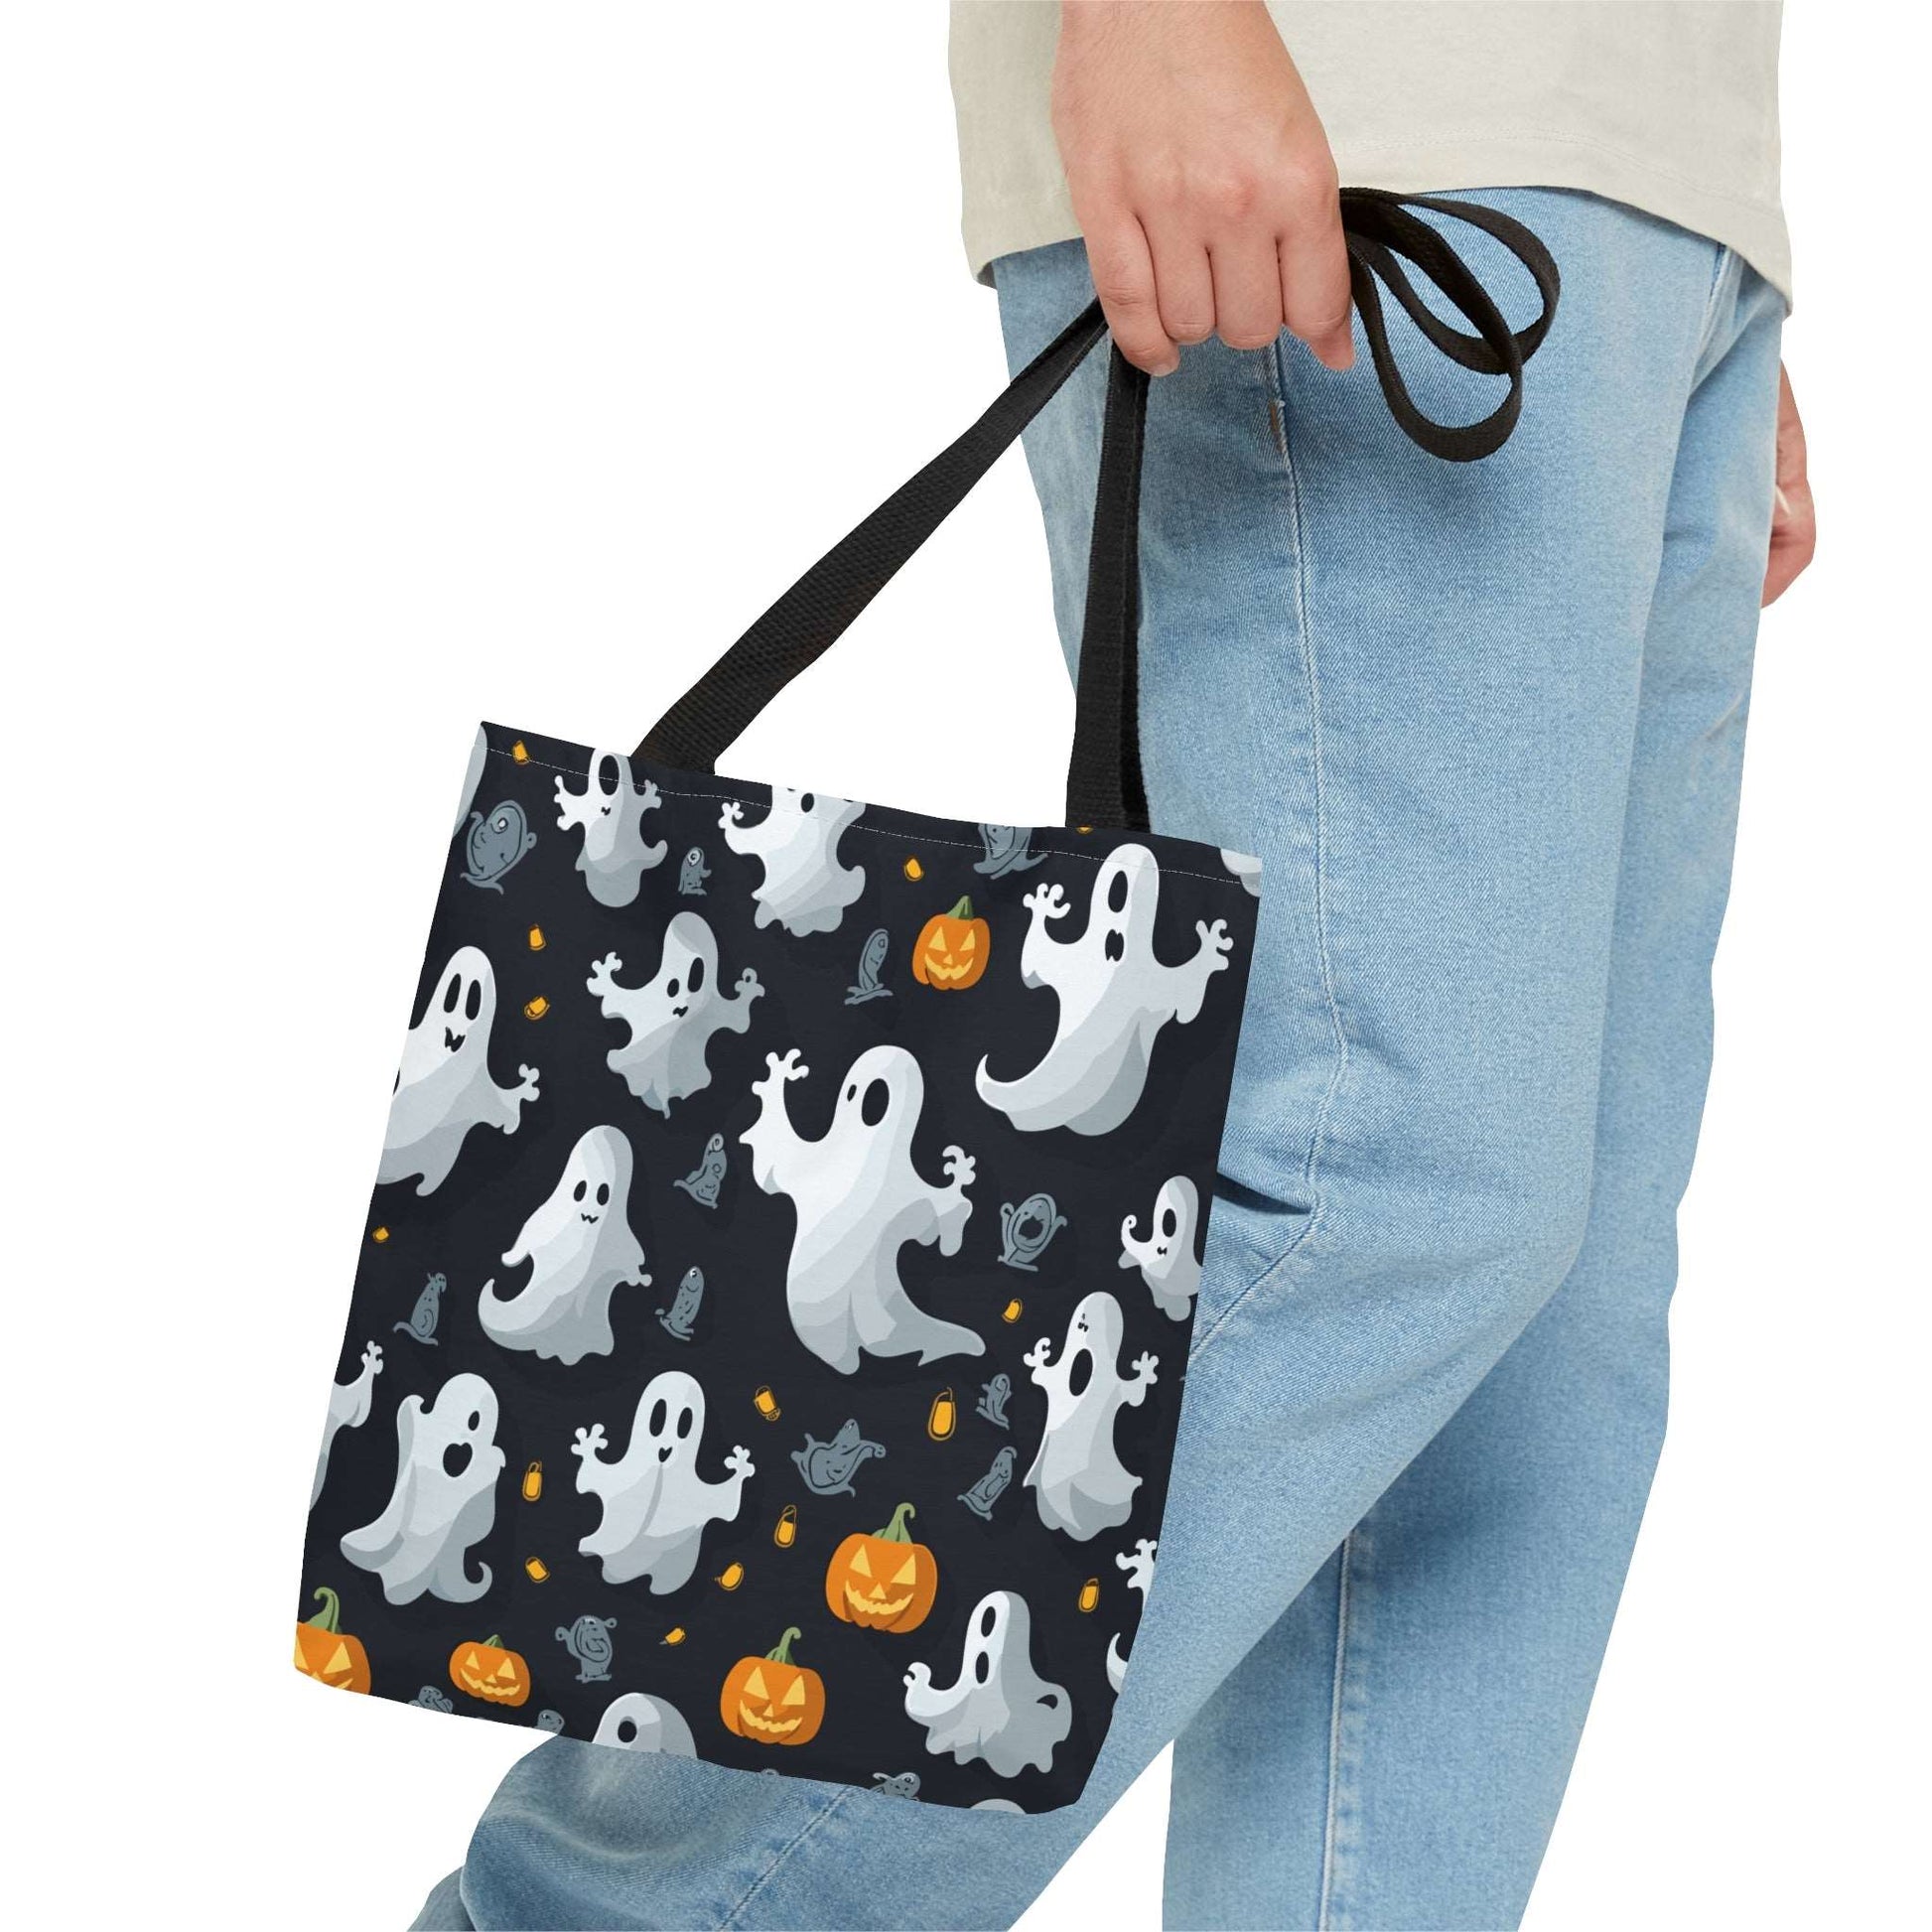 Ghost Tote Bag from Fierce Fusion